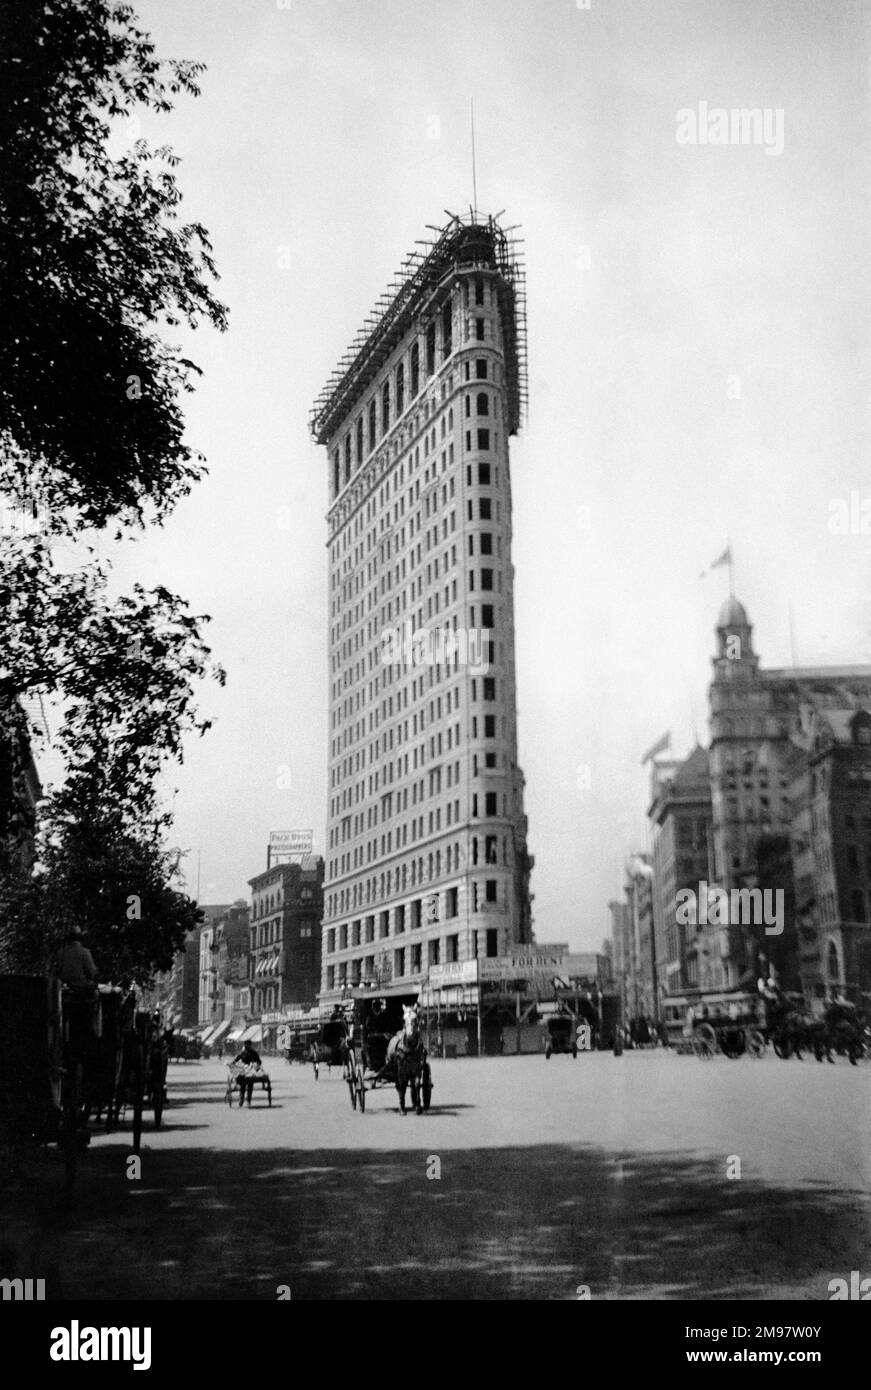 Originaly named The Fuller Building upon its completion  in 1902. Now reconised as the Flatiron building due to it resemblance to a cast iron cloths iron. The building became a designated New York land mark in 1966, later in 1989 a national historic land mark. Stock Photo